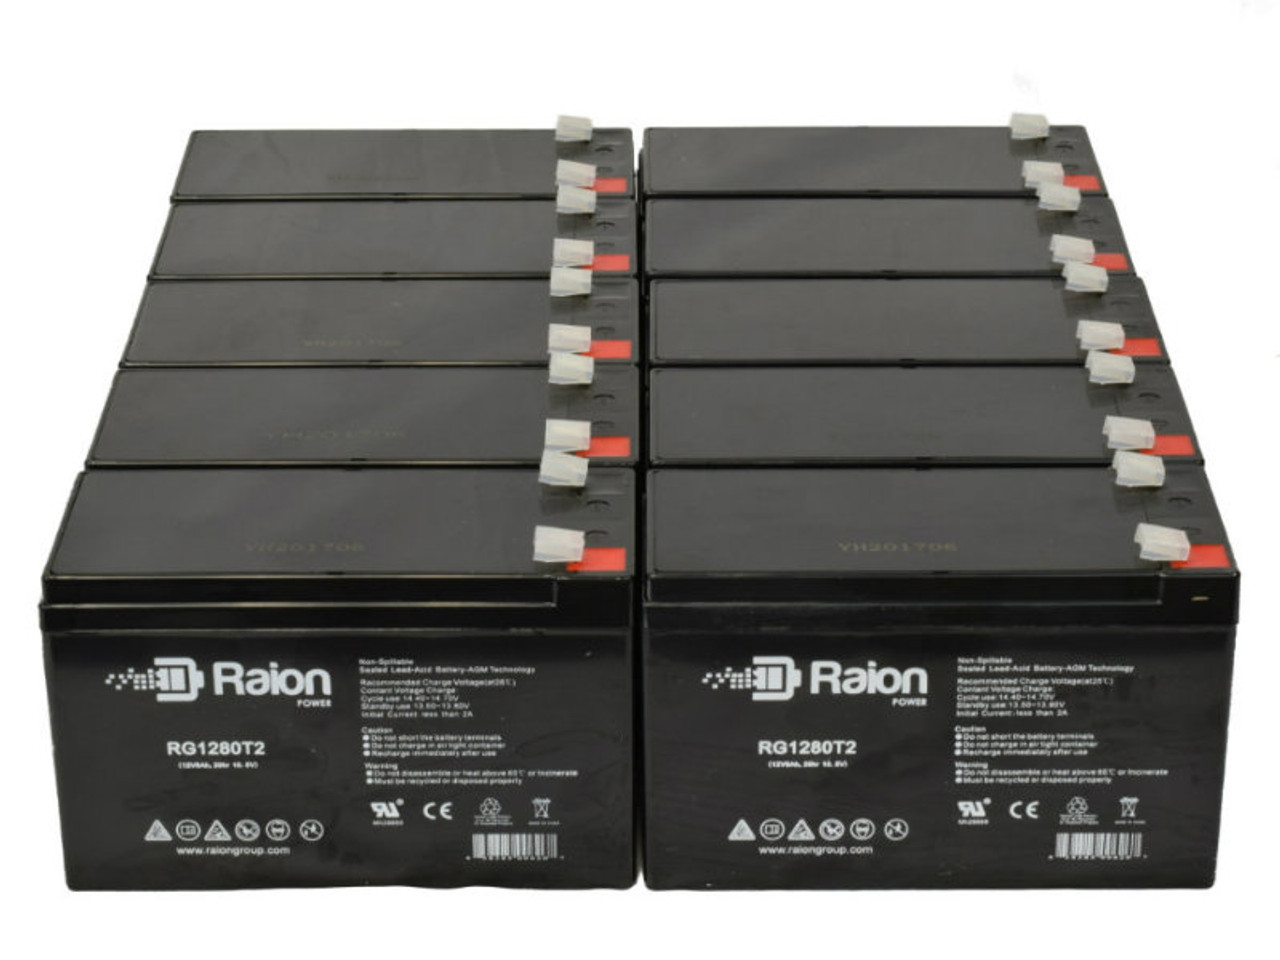 Raion Power Replacement 12V 8Ah RG1280T2 Battery for Astro-Med Inc. Astromed Recorder Dash I - 10 Pack